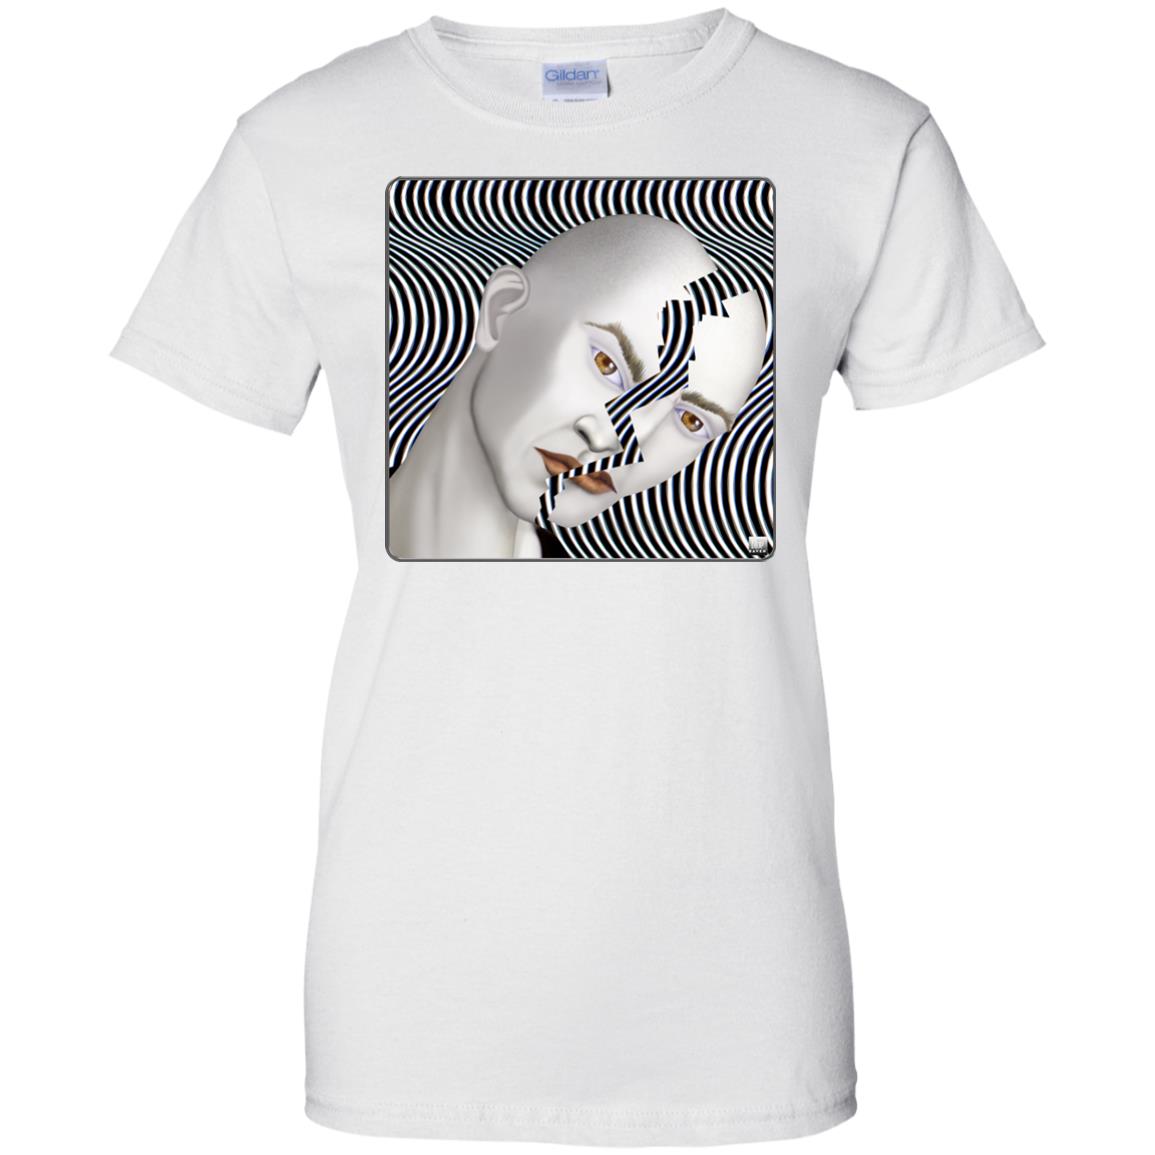 cracked until coffee - Women's Relaxed Fit T-Shirt